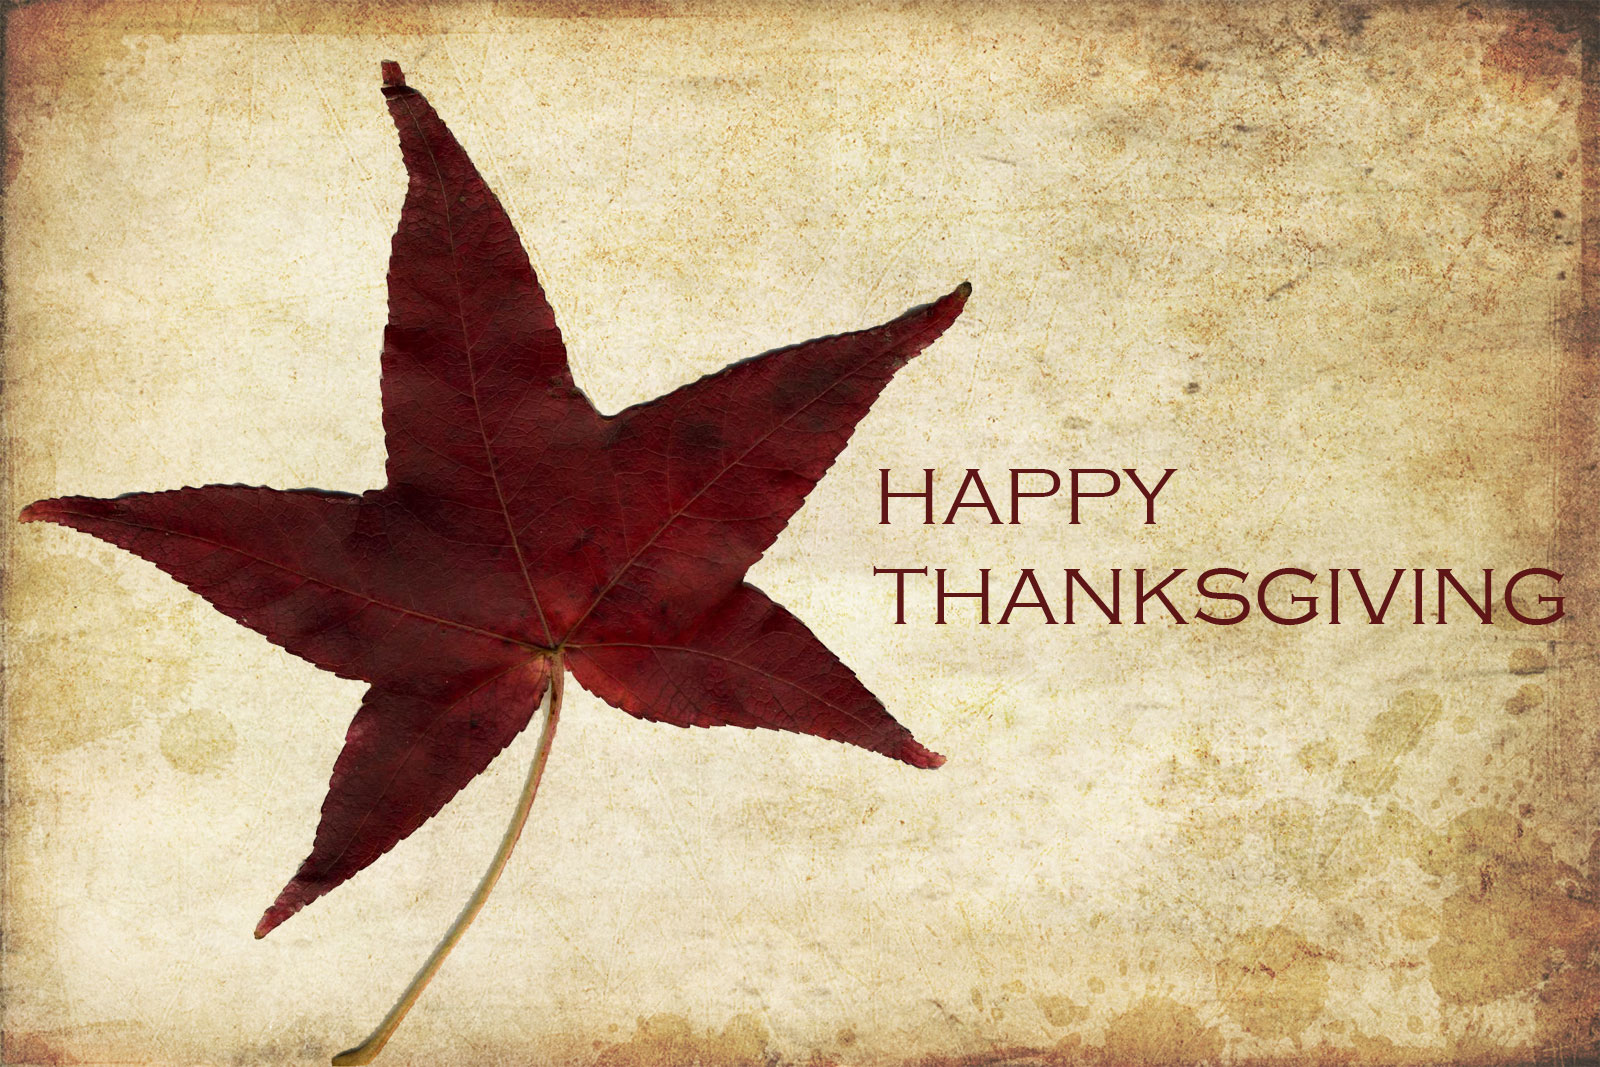 Happy Thanksgiving Day 2013 HD Wallpapers & Facebook Cover Photos – Designbolts1600 x 1067